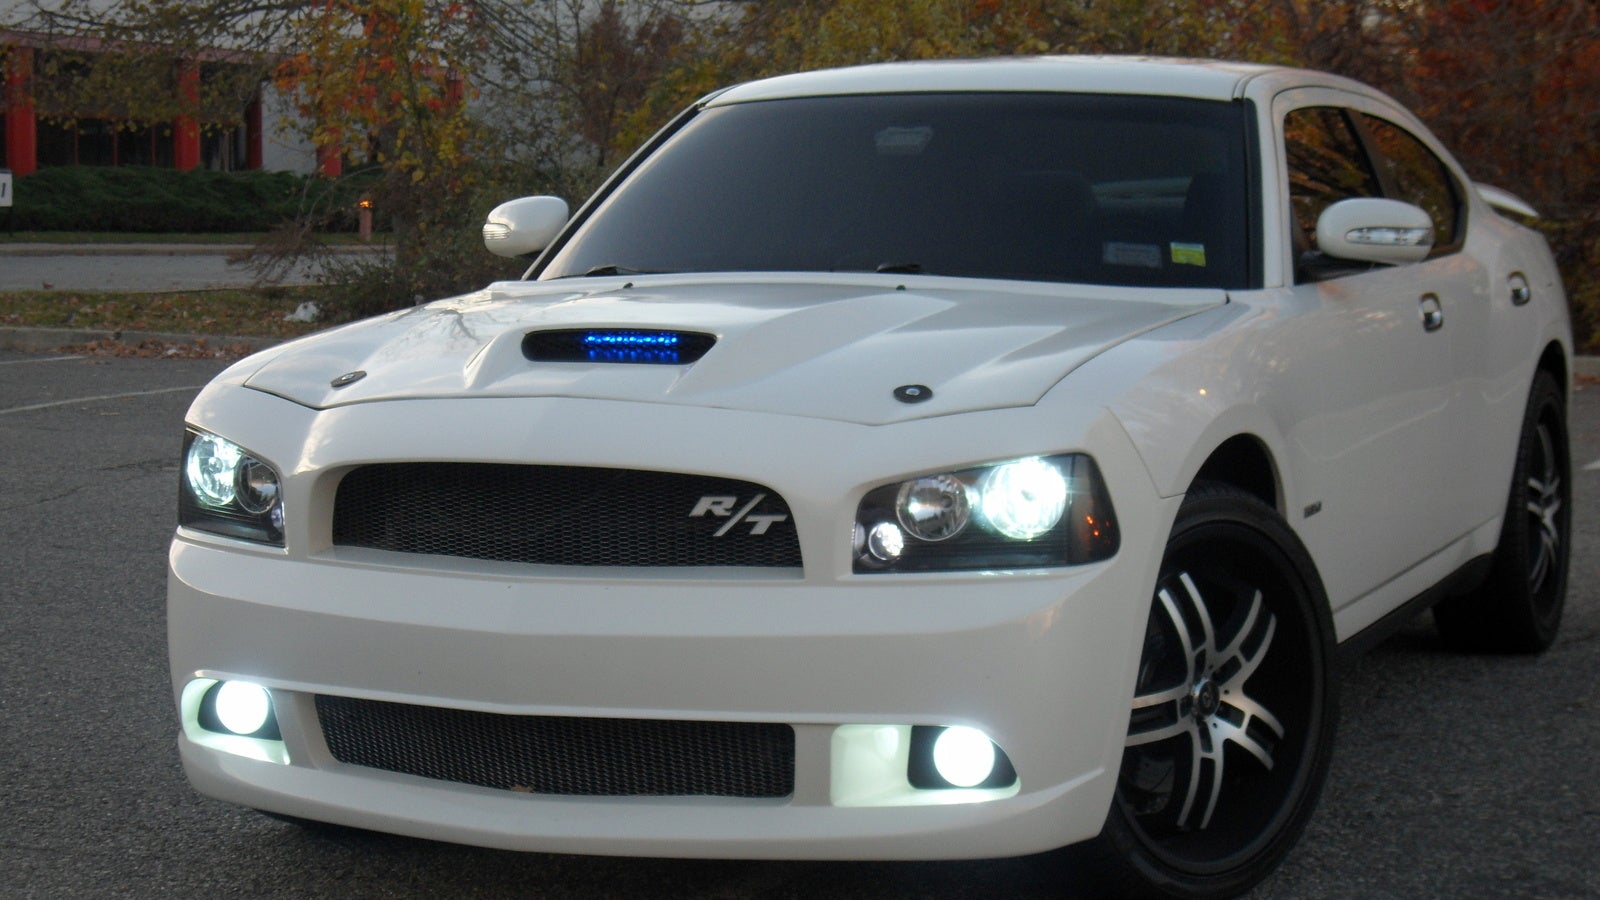 2007 Dodge Charger R/T AWD - Pictures - Front - CarGurus